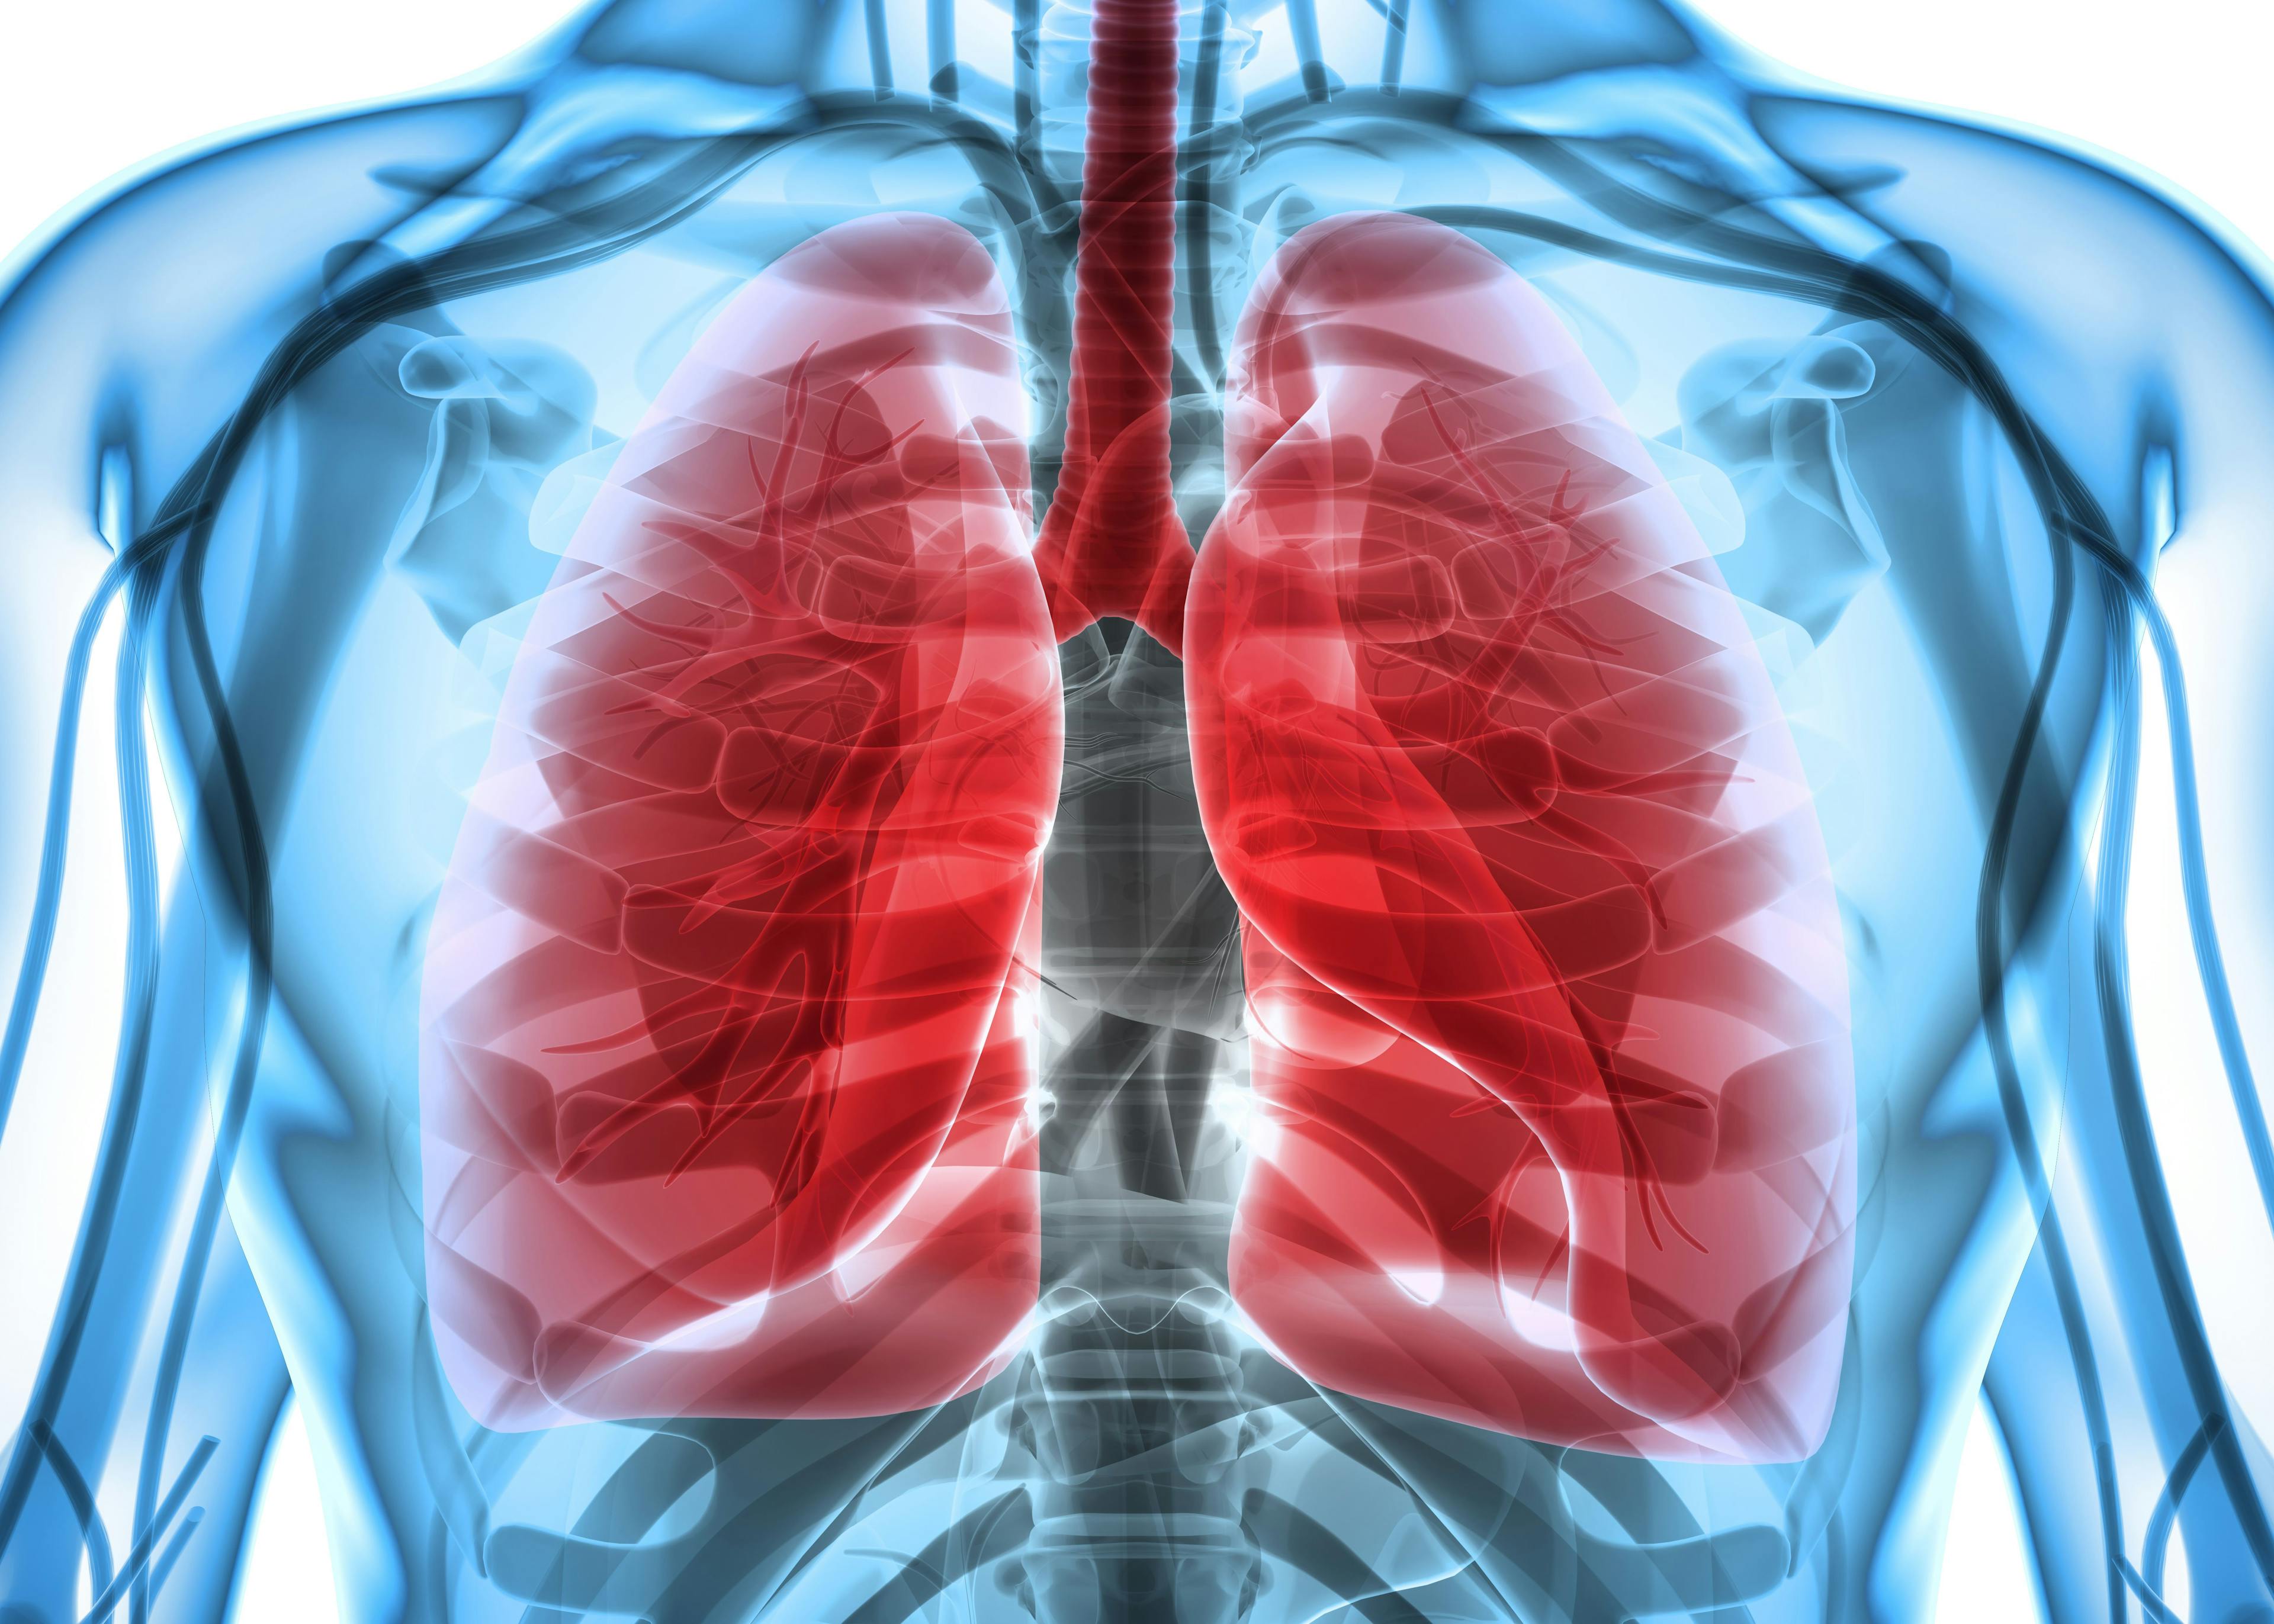 Lesser Studied Nonrespiratory Complications in Nusinersen-Treated SMA1 May Affect Outcomes